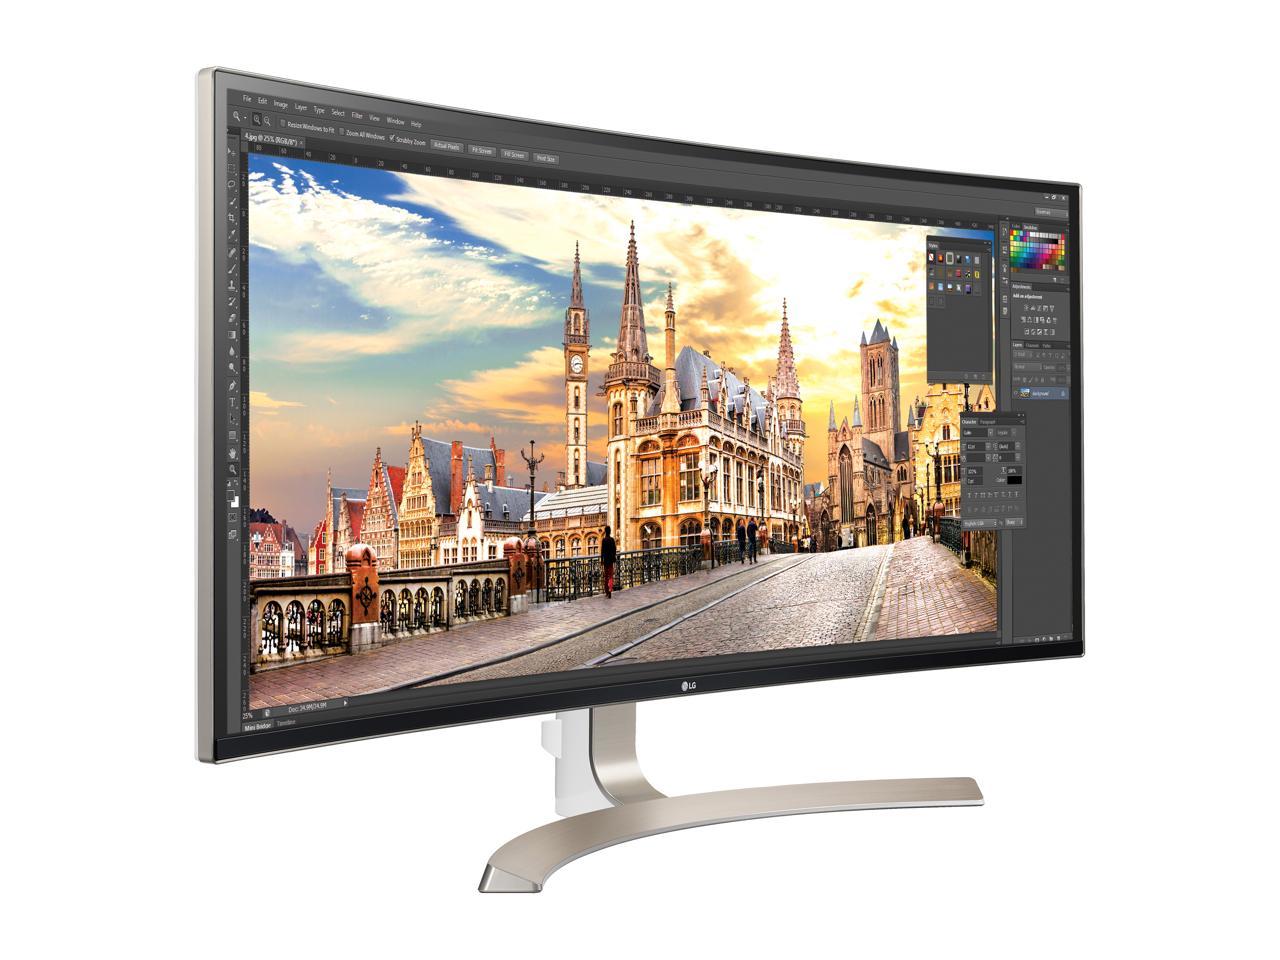 LG 38UC99-W 38" Class 21:9 3840 x 1600 UltraWide IPS Curved Monitor, FreeSync, 1ms Motion Blur Reduction, Built-in Speakers